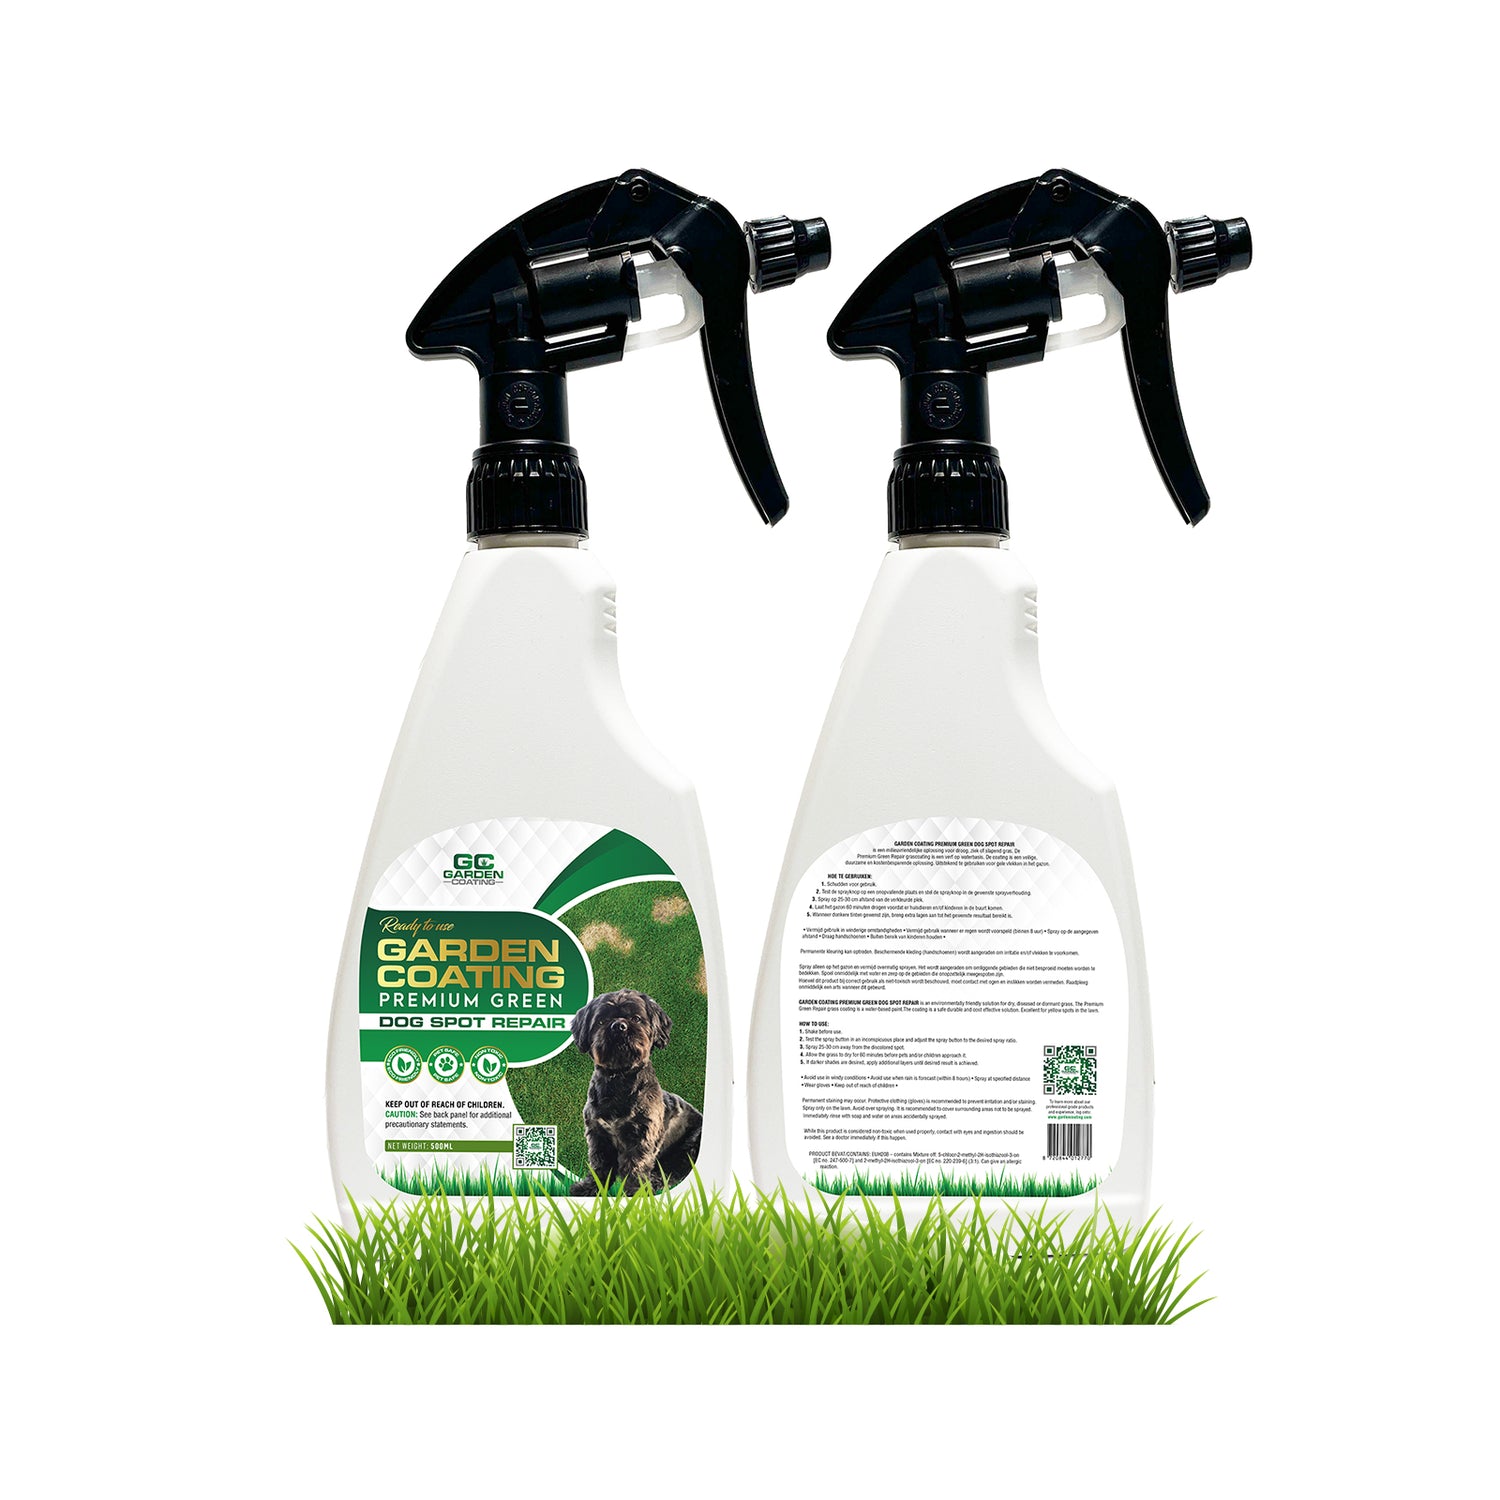 Garden Coating Dog spot repair Ready to use grass paint 500 ml